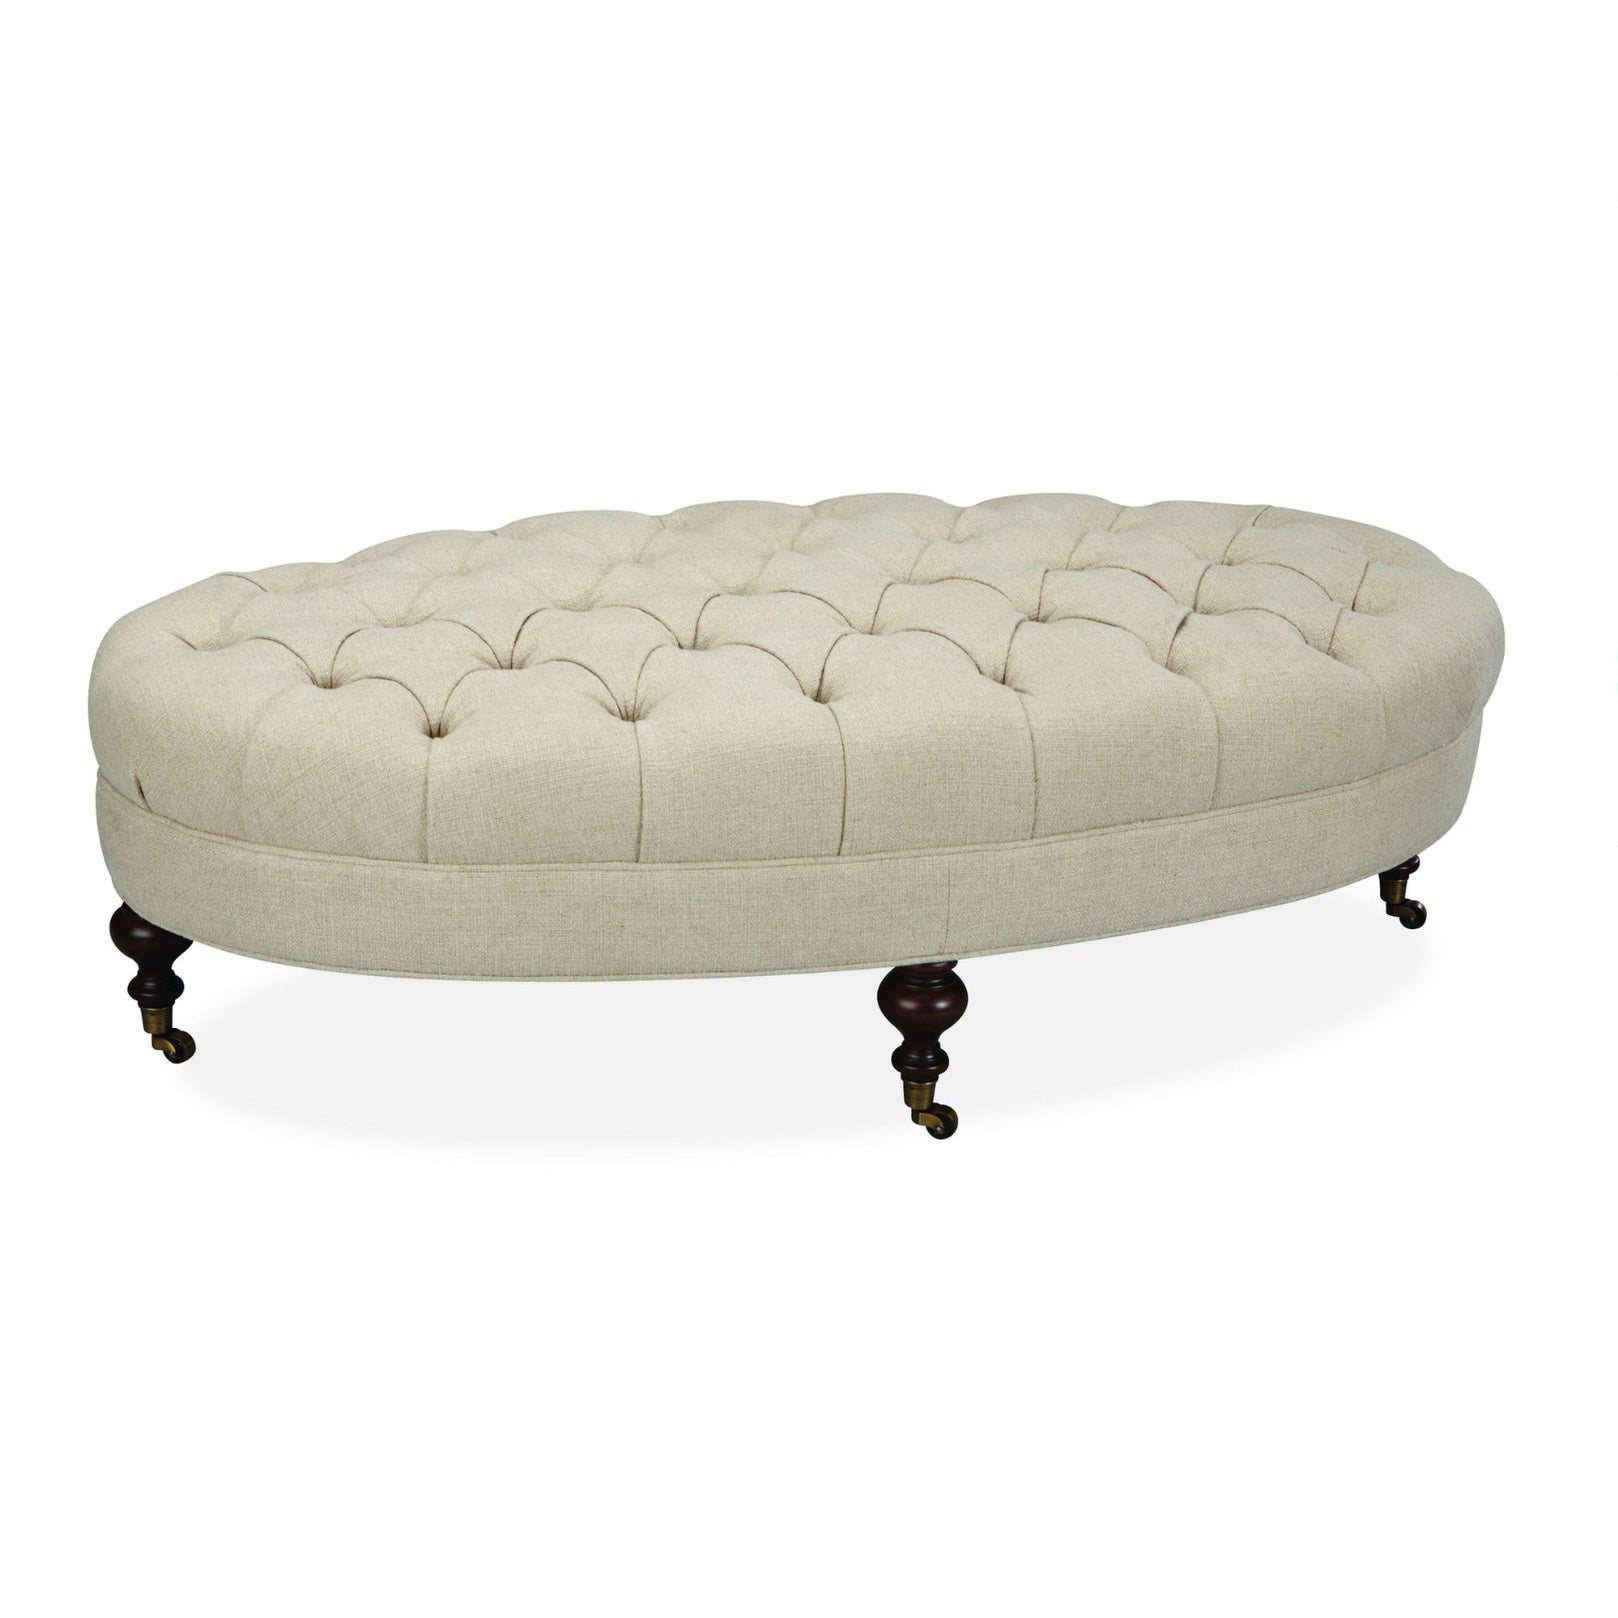 Lee Industries 1614-90 Cocktail Ottoman